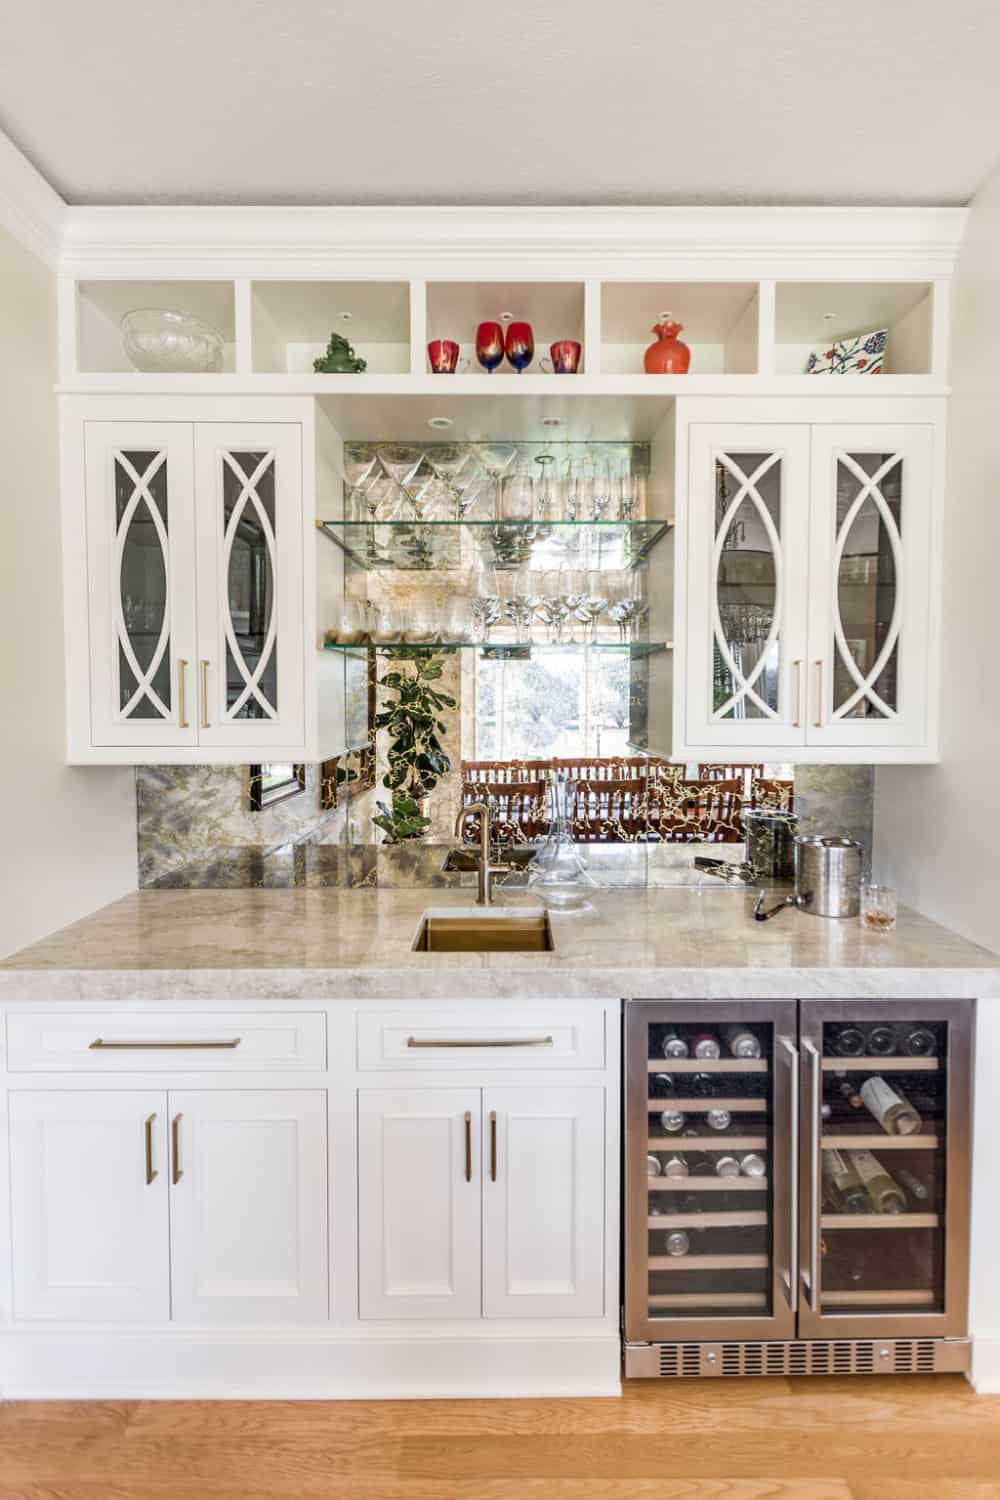 Nicholas Design Build | A recently remodeled kitchen with white cabinets and a wine rack.